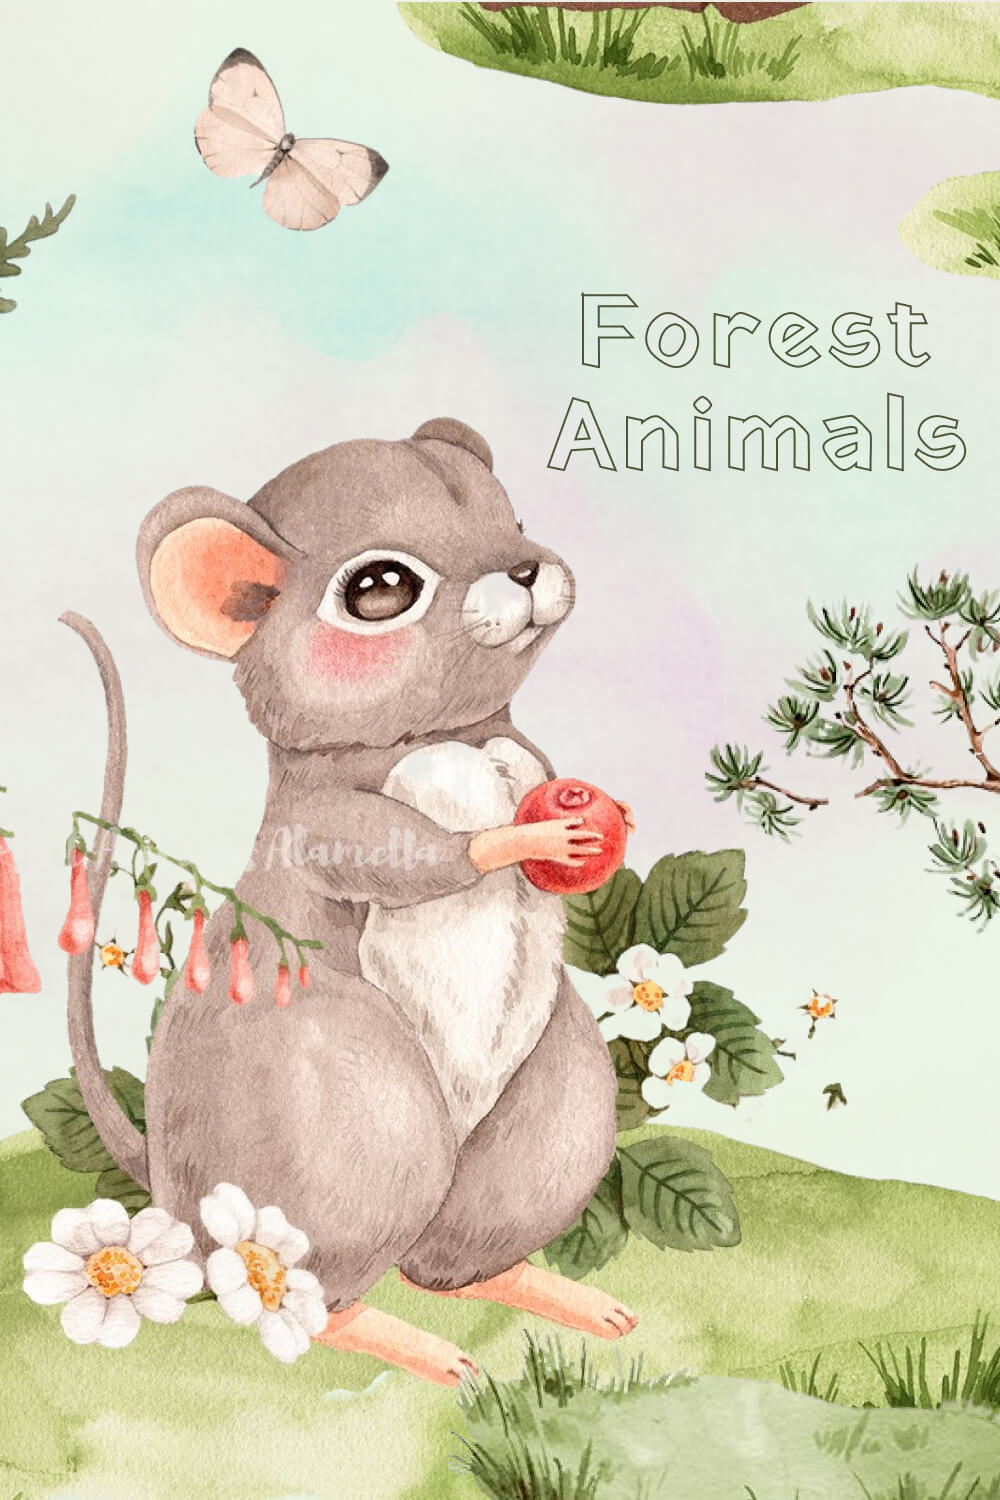 Little field mouse in a forest clearing.